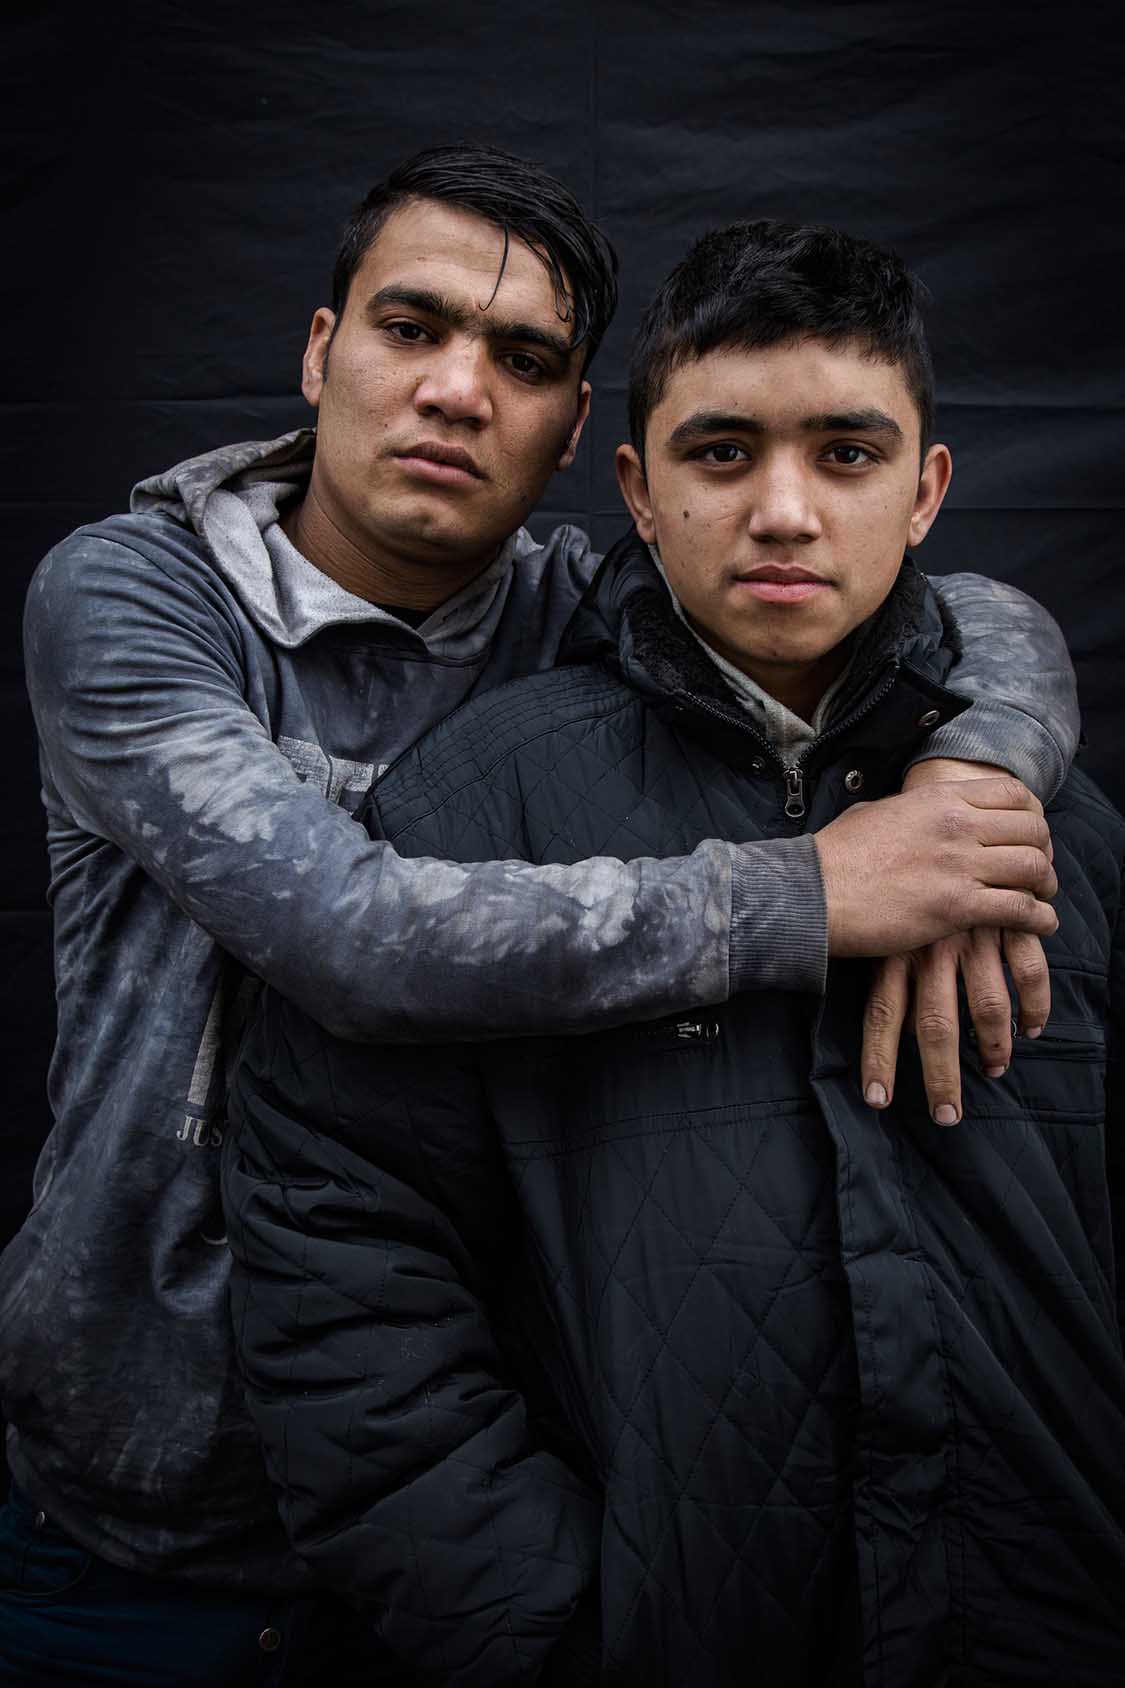  "We are friends, we left Afghanistan together. 
That was more than one year ago."

Abdullah and Ijaza, Afghanistan.  